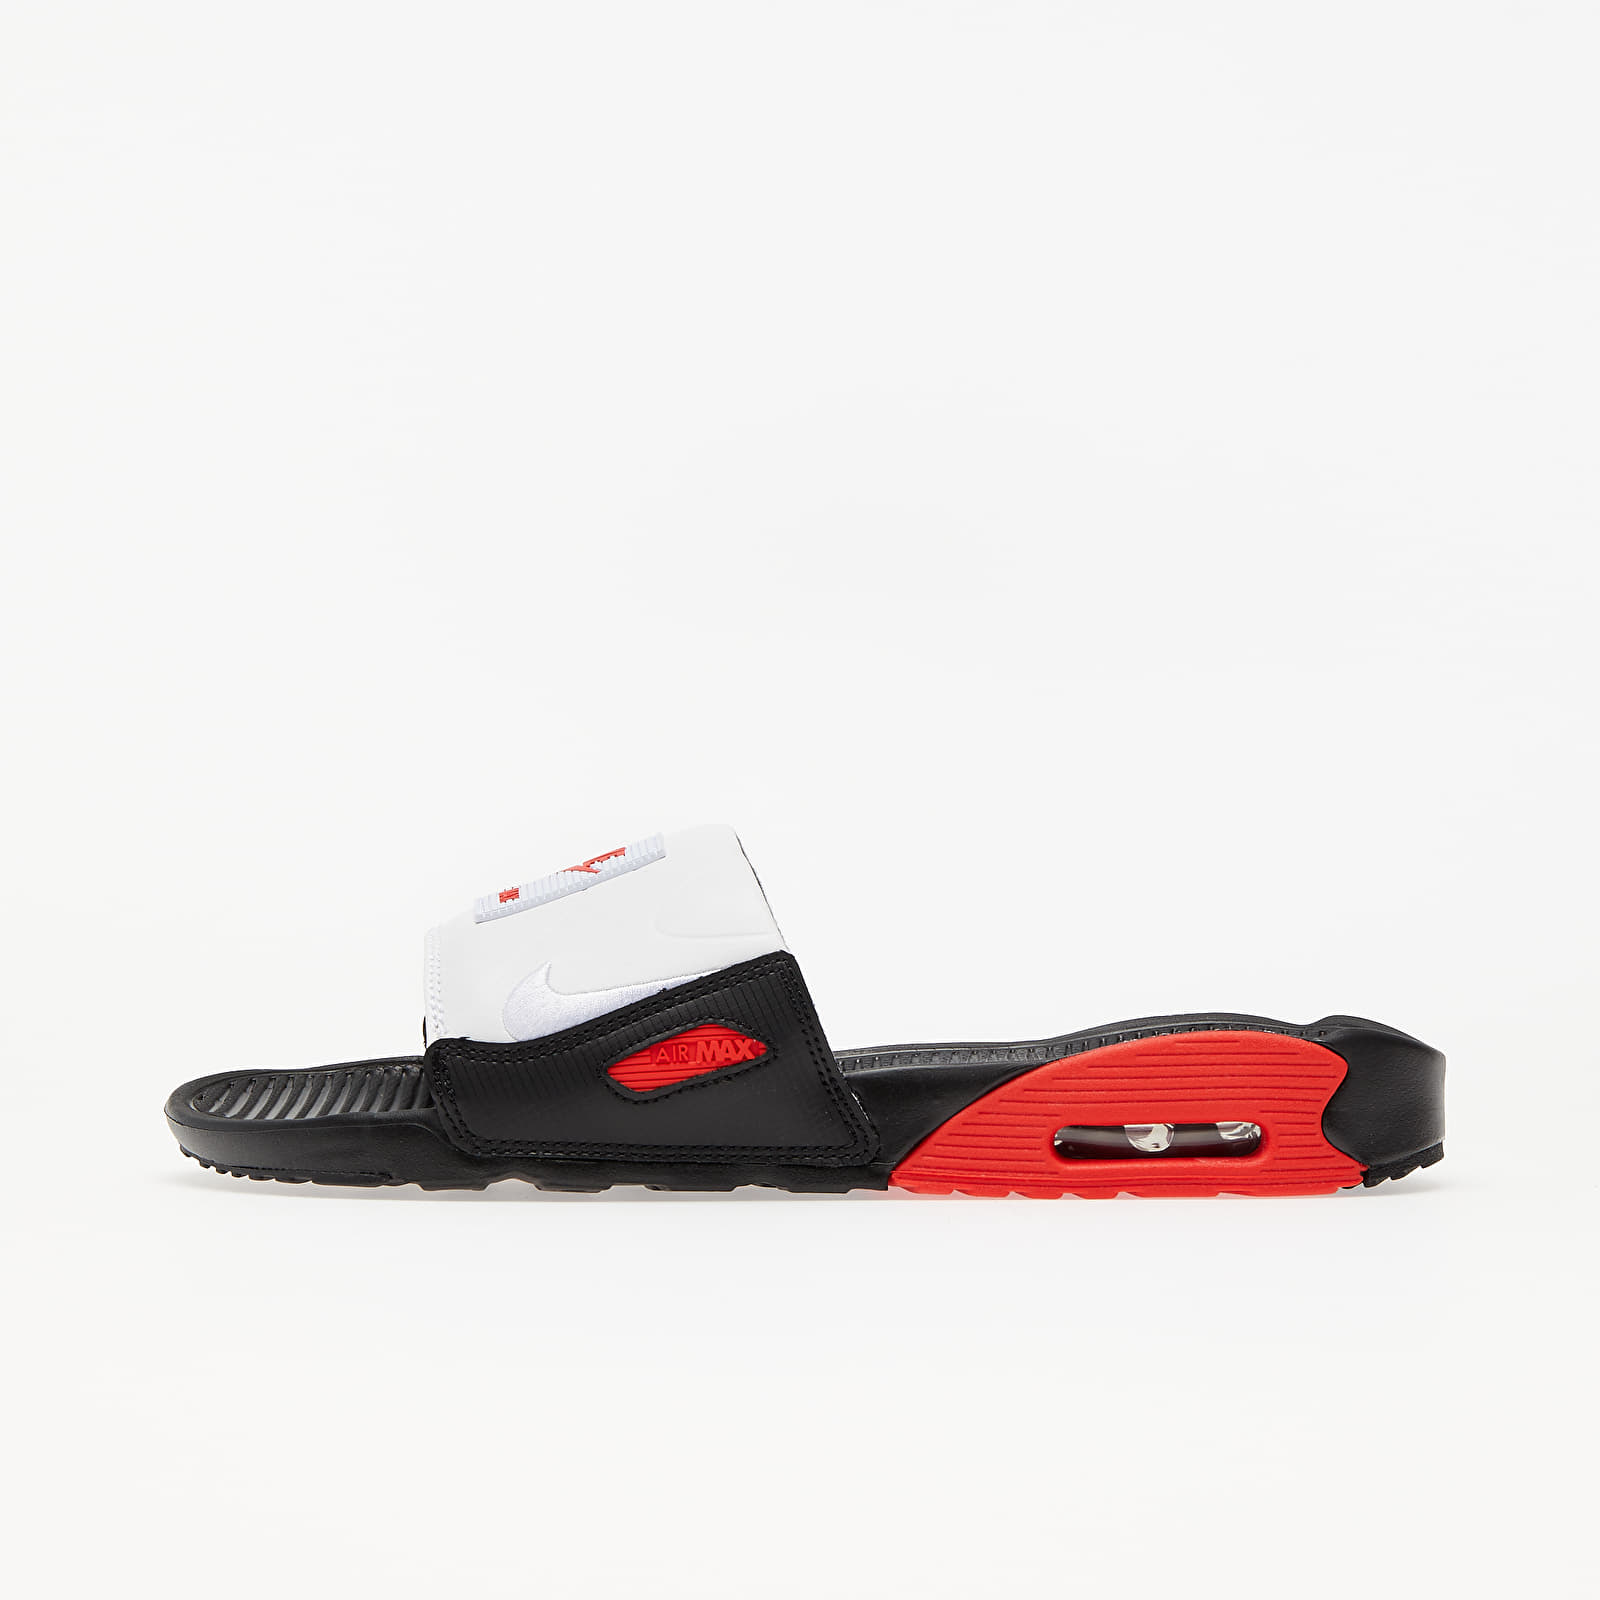 Chaussures et baskets homme Nike Air Max 90 Slide Black/ White-Chile Red